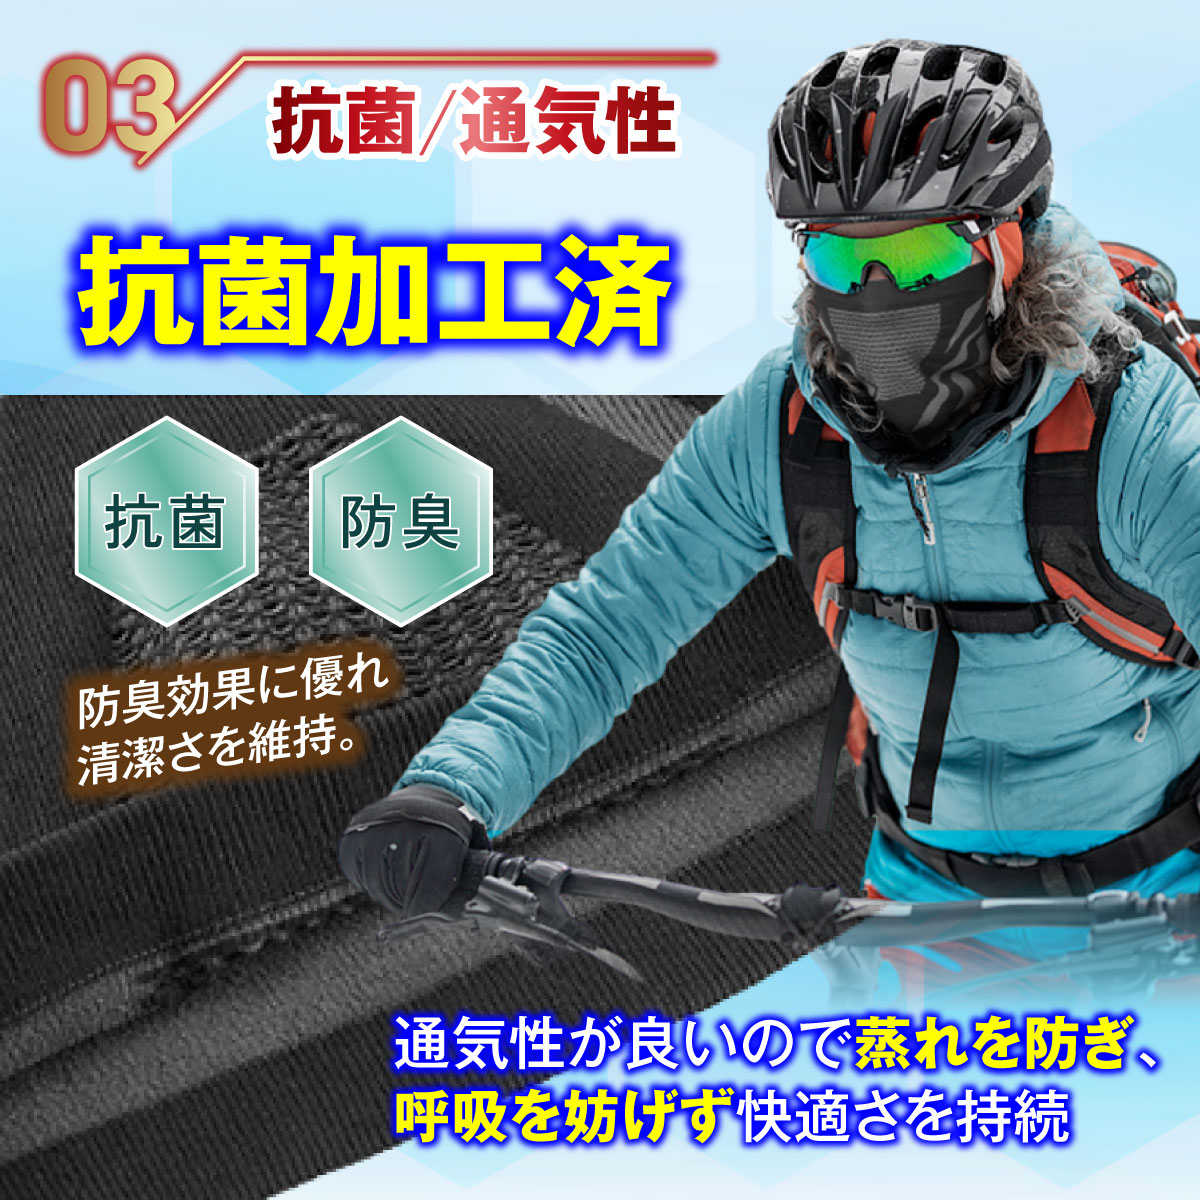  neck warmer men's face warmer mask face mask protection against cold snowboard snowboard winter lady's bike warm protection against cold mask . manner neck guard 